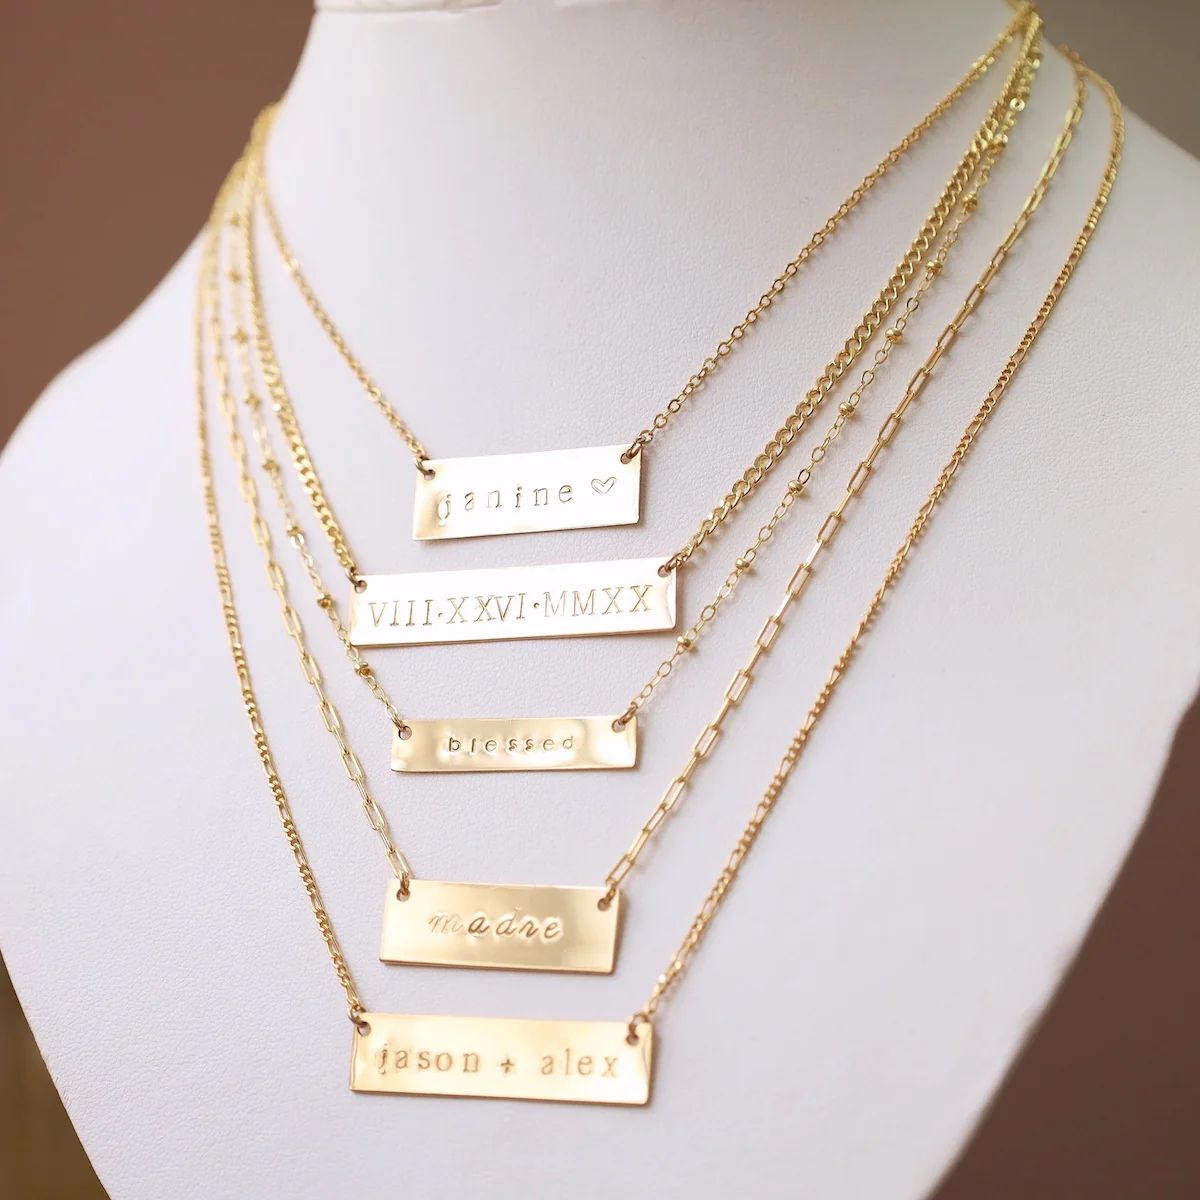 Make It Personal Plate Necklace | Taudrey